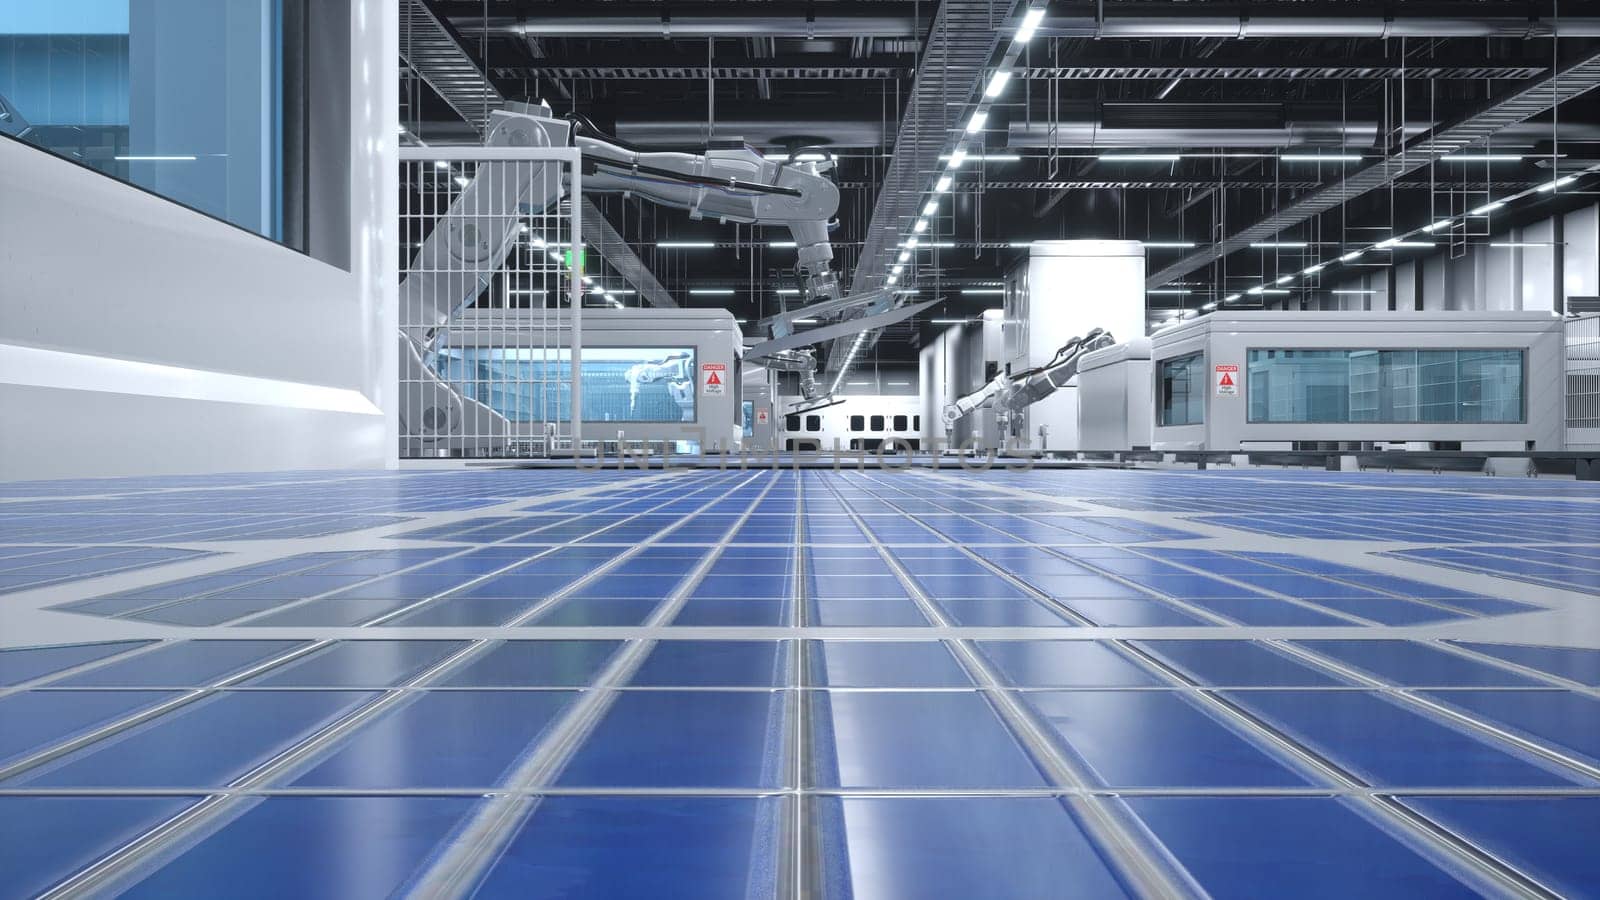 Focus on solar panels on conveyor belts with robotic arms operating in blurry background in factory, 3D illustration. PV cells being moved around facility using assembly lines, close up